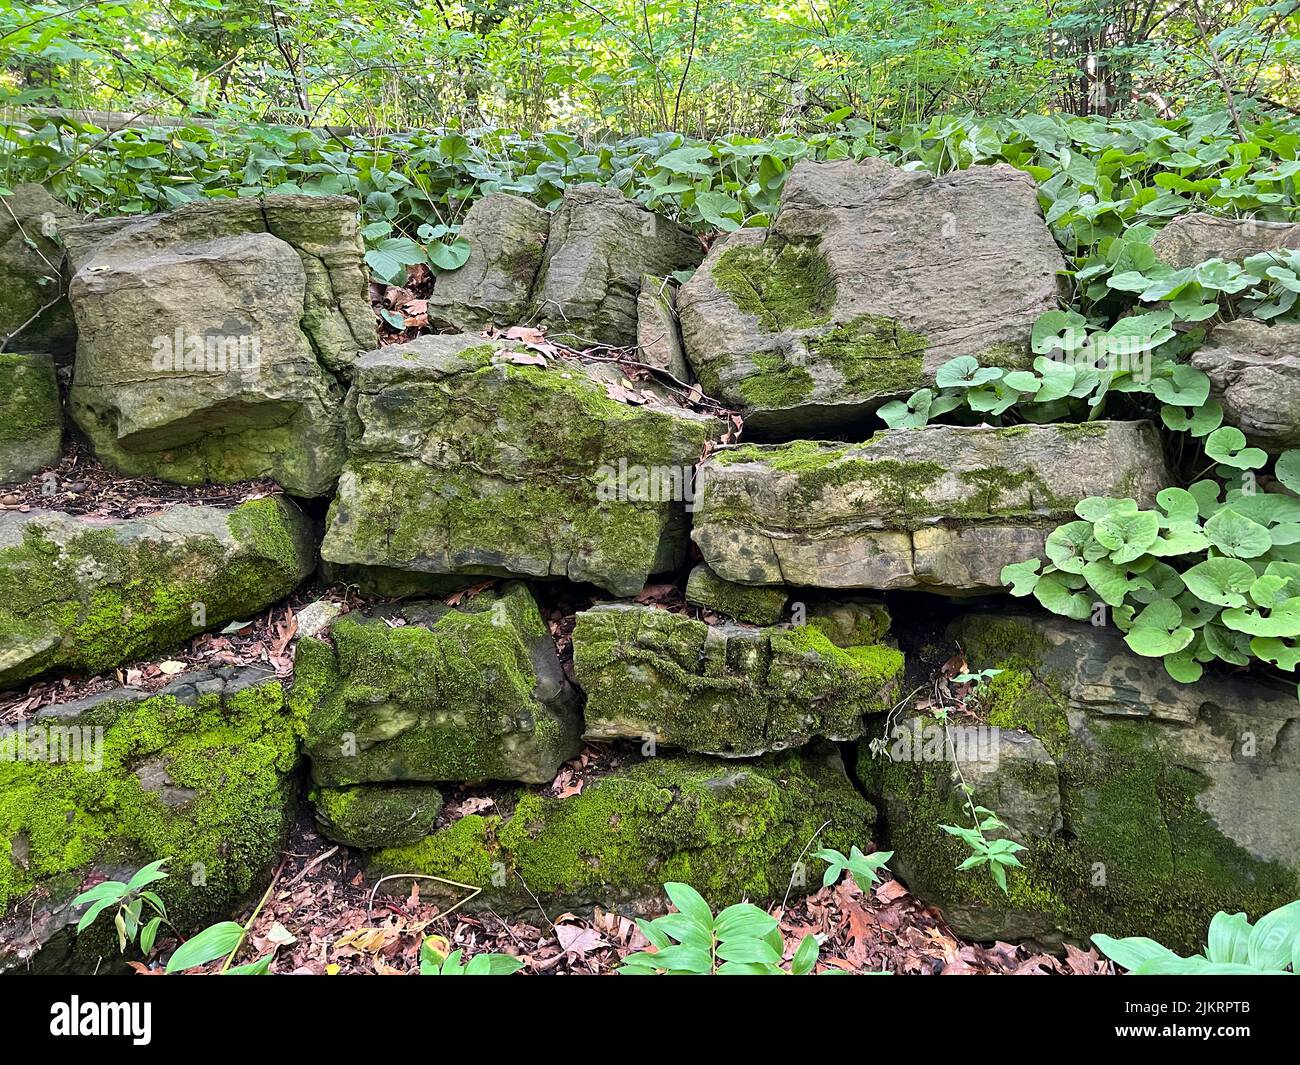 Limestone outcroppings occur throughout upstate New York, New Jersey, and eastern Pennsylvania. The soil that forms around them is alkaline and rich in calcium and other plant nutrients. A variety of plants thrive in this type of habitat, and limestone ledges are some of the best places to see this region's spring wildflowers and ferns. Stock Photo